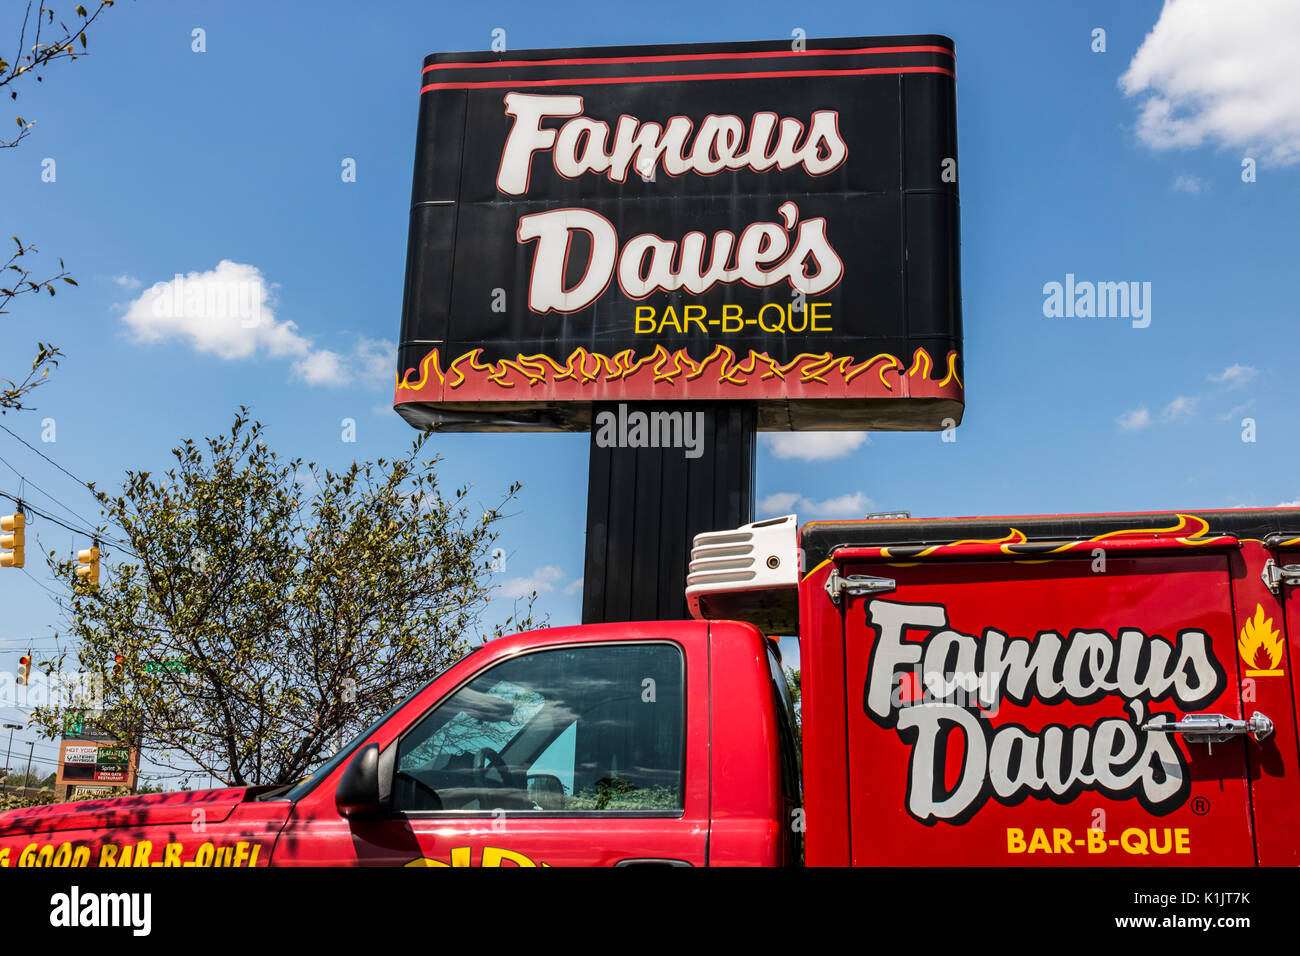 Rustic and woodsy decor - Picture of Famous Dave's Bar-B-Que